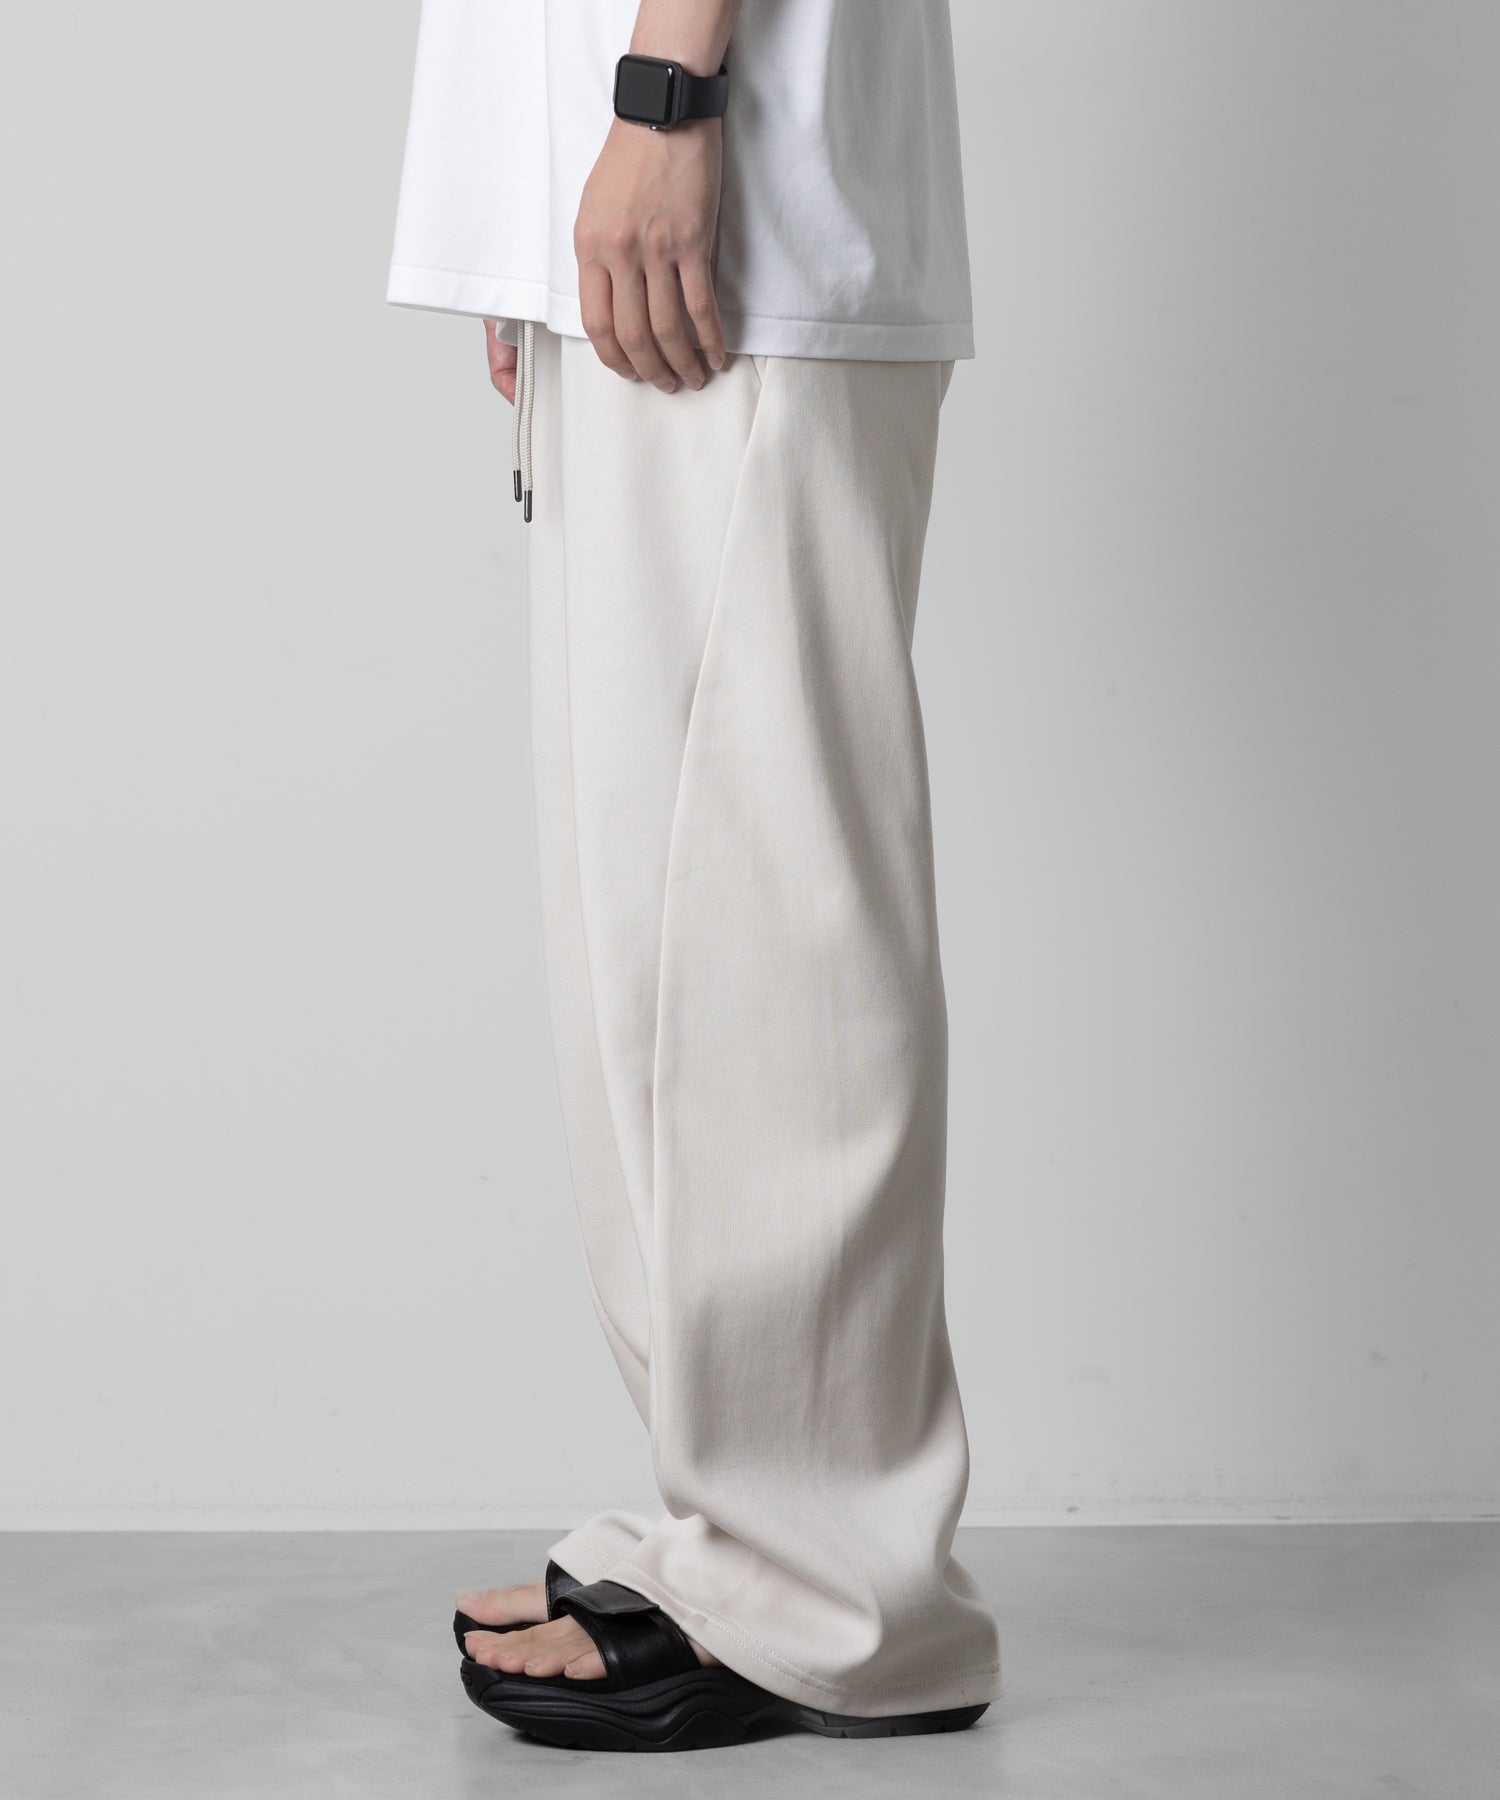 ATTACHMENT アタッチメントのCO/PE DOUBLE KNIT THREE DIMENSIONAL WIDE PANTS - OFF WHITEの公式通販サイトsession福岡セレクトショップ